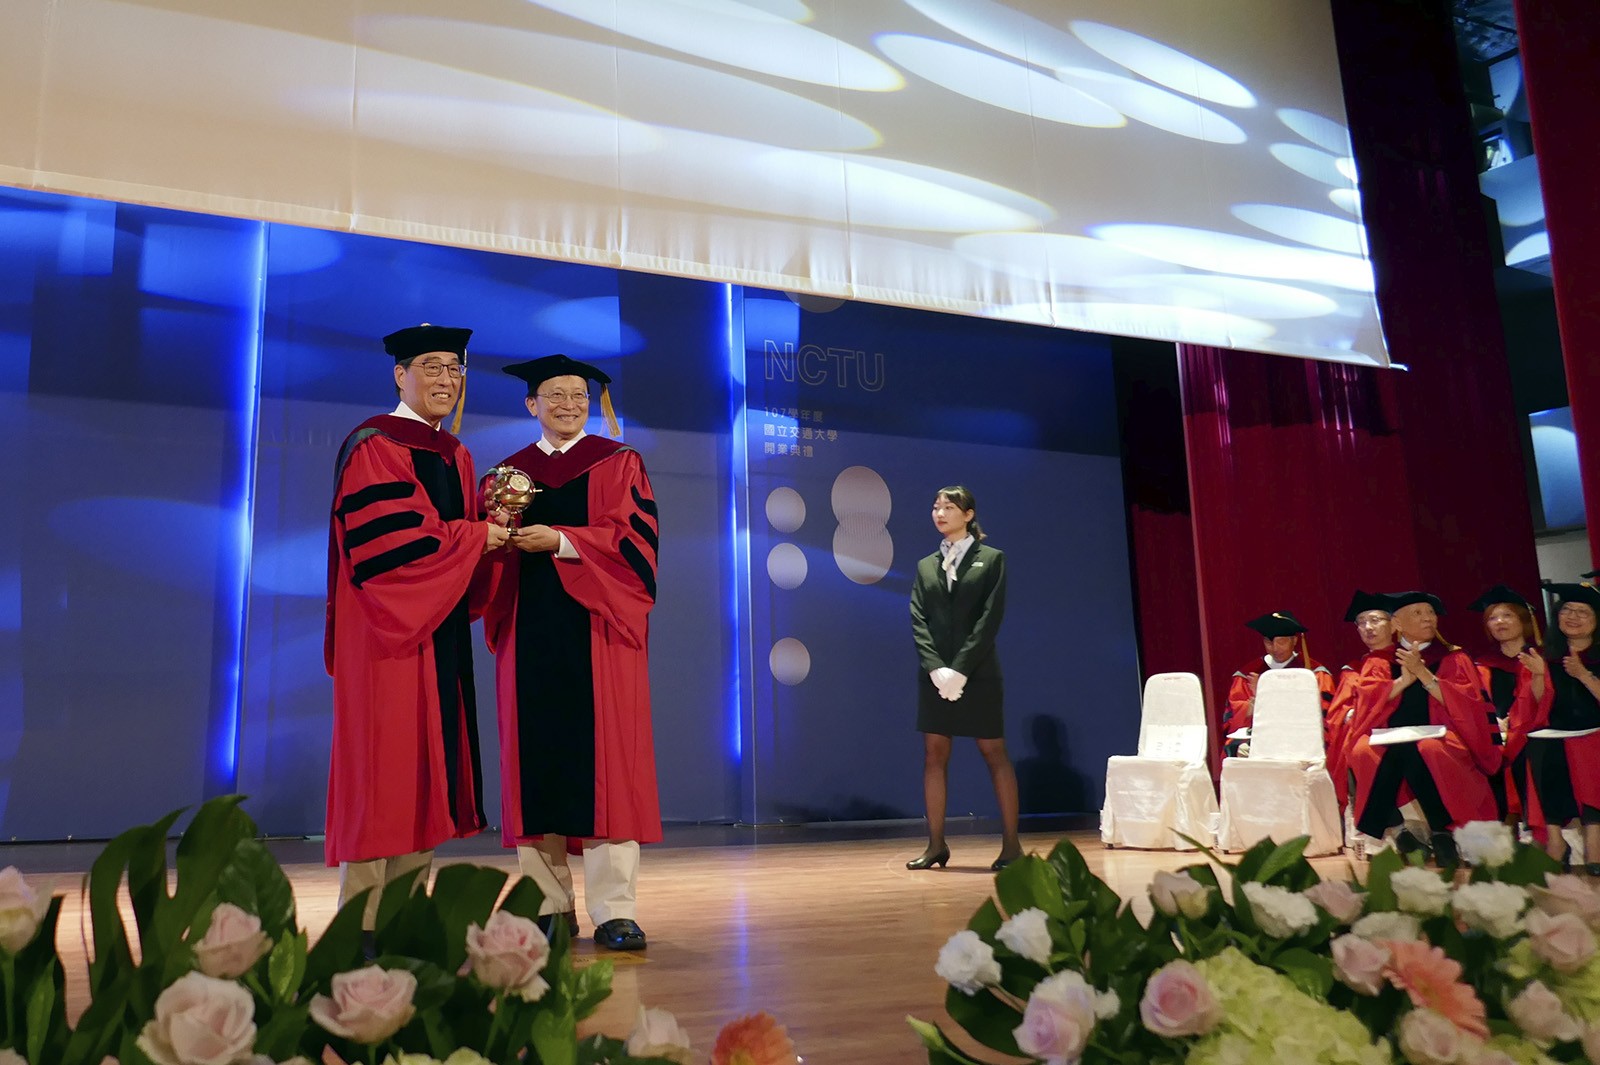 Professor Chang, President of NCTU, presents a souvenir to President Kuo (first on left).